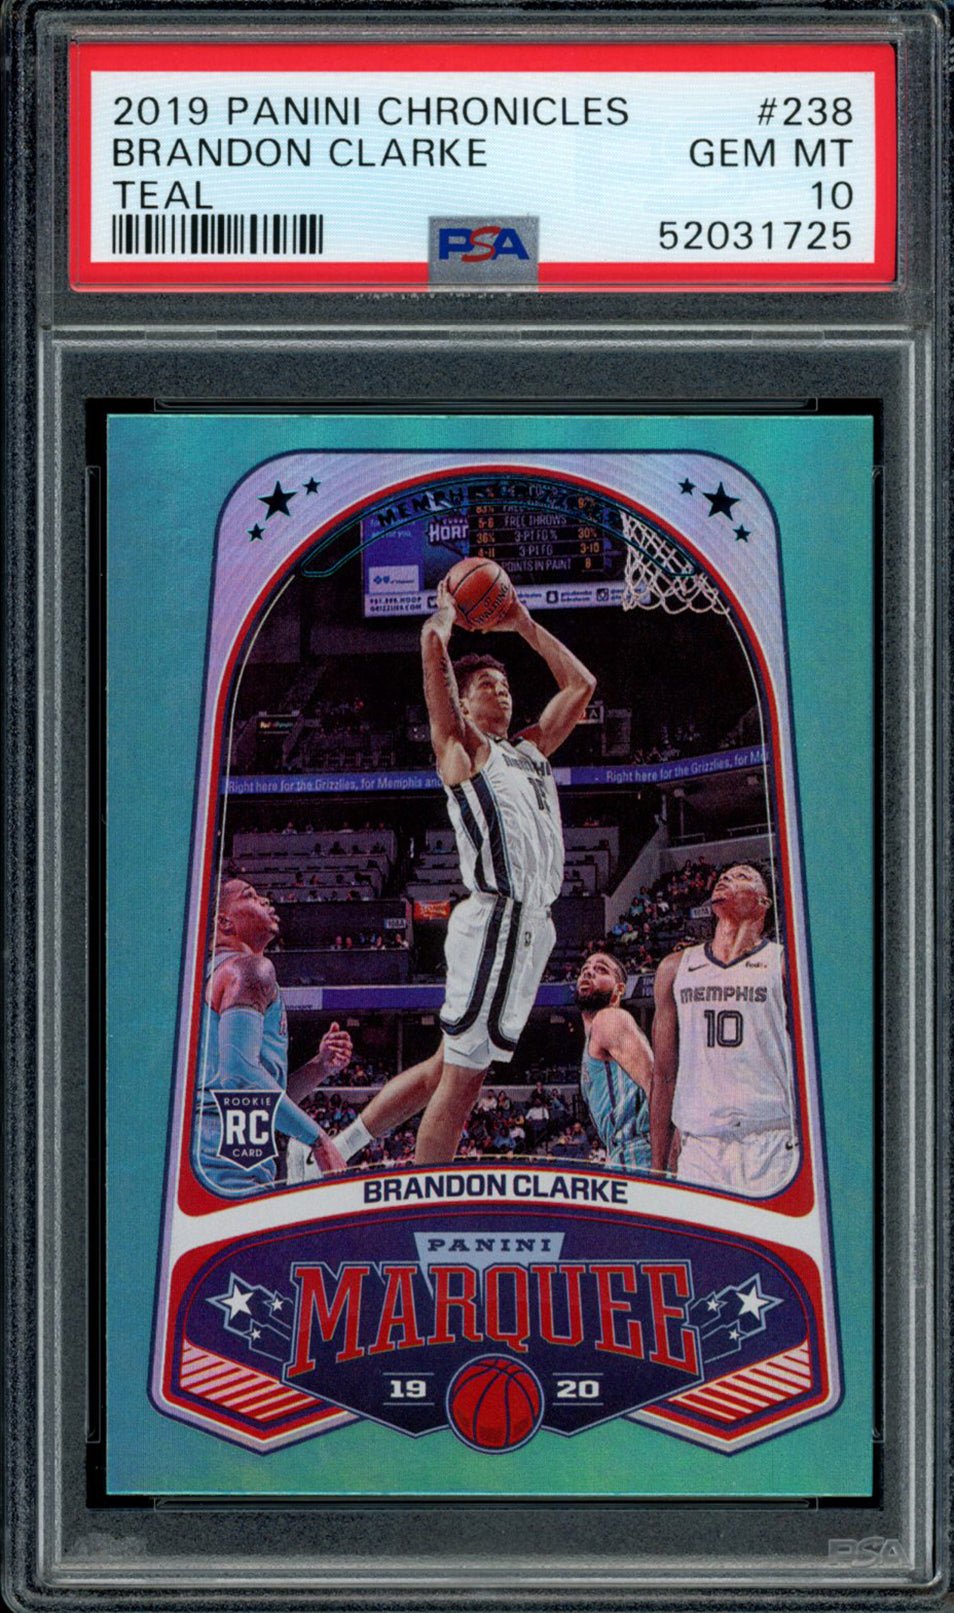 BRANDON CLARKE PSA 10 2019-20 Panini Chronicles RC Marquee Teal #238 Basketball Graded Cards Parallel RC - Hobby Gems